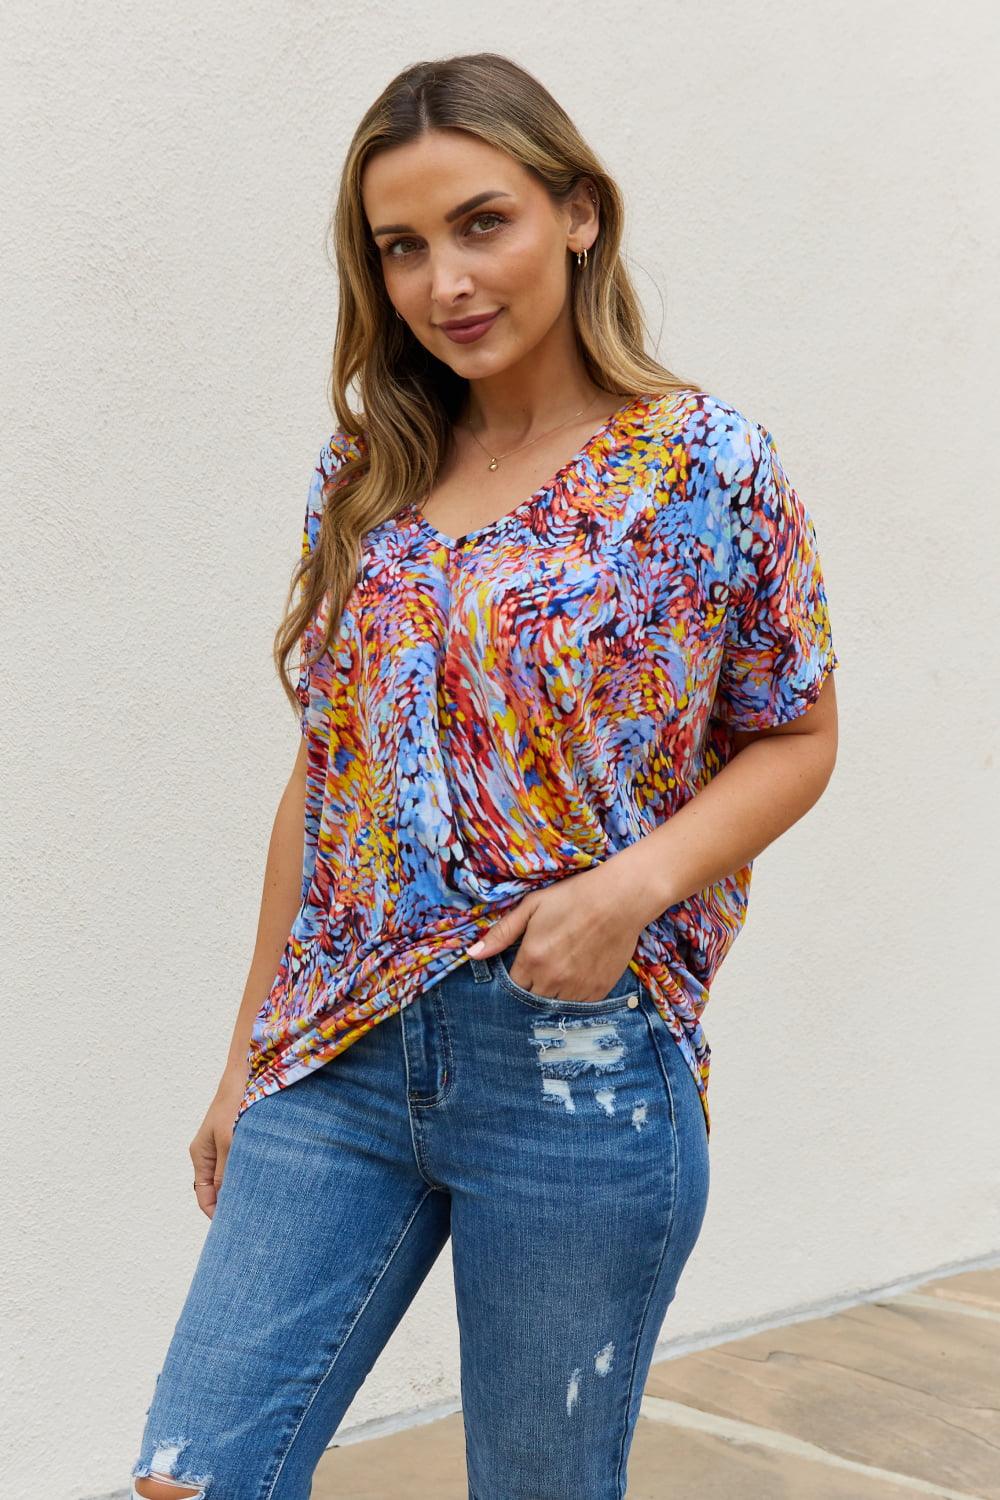 Be Stage Full Size Printed Dolman Flowy Top - Immenzive